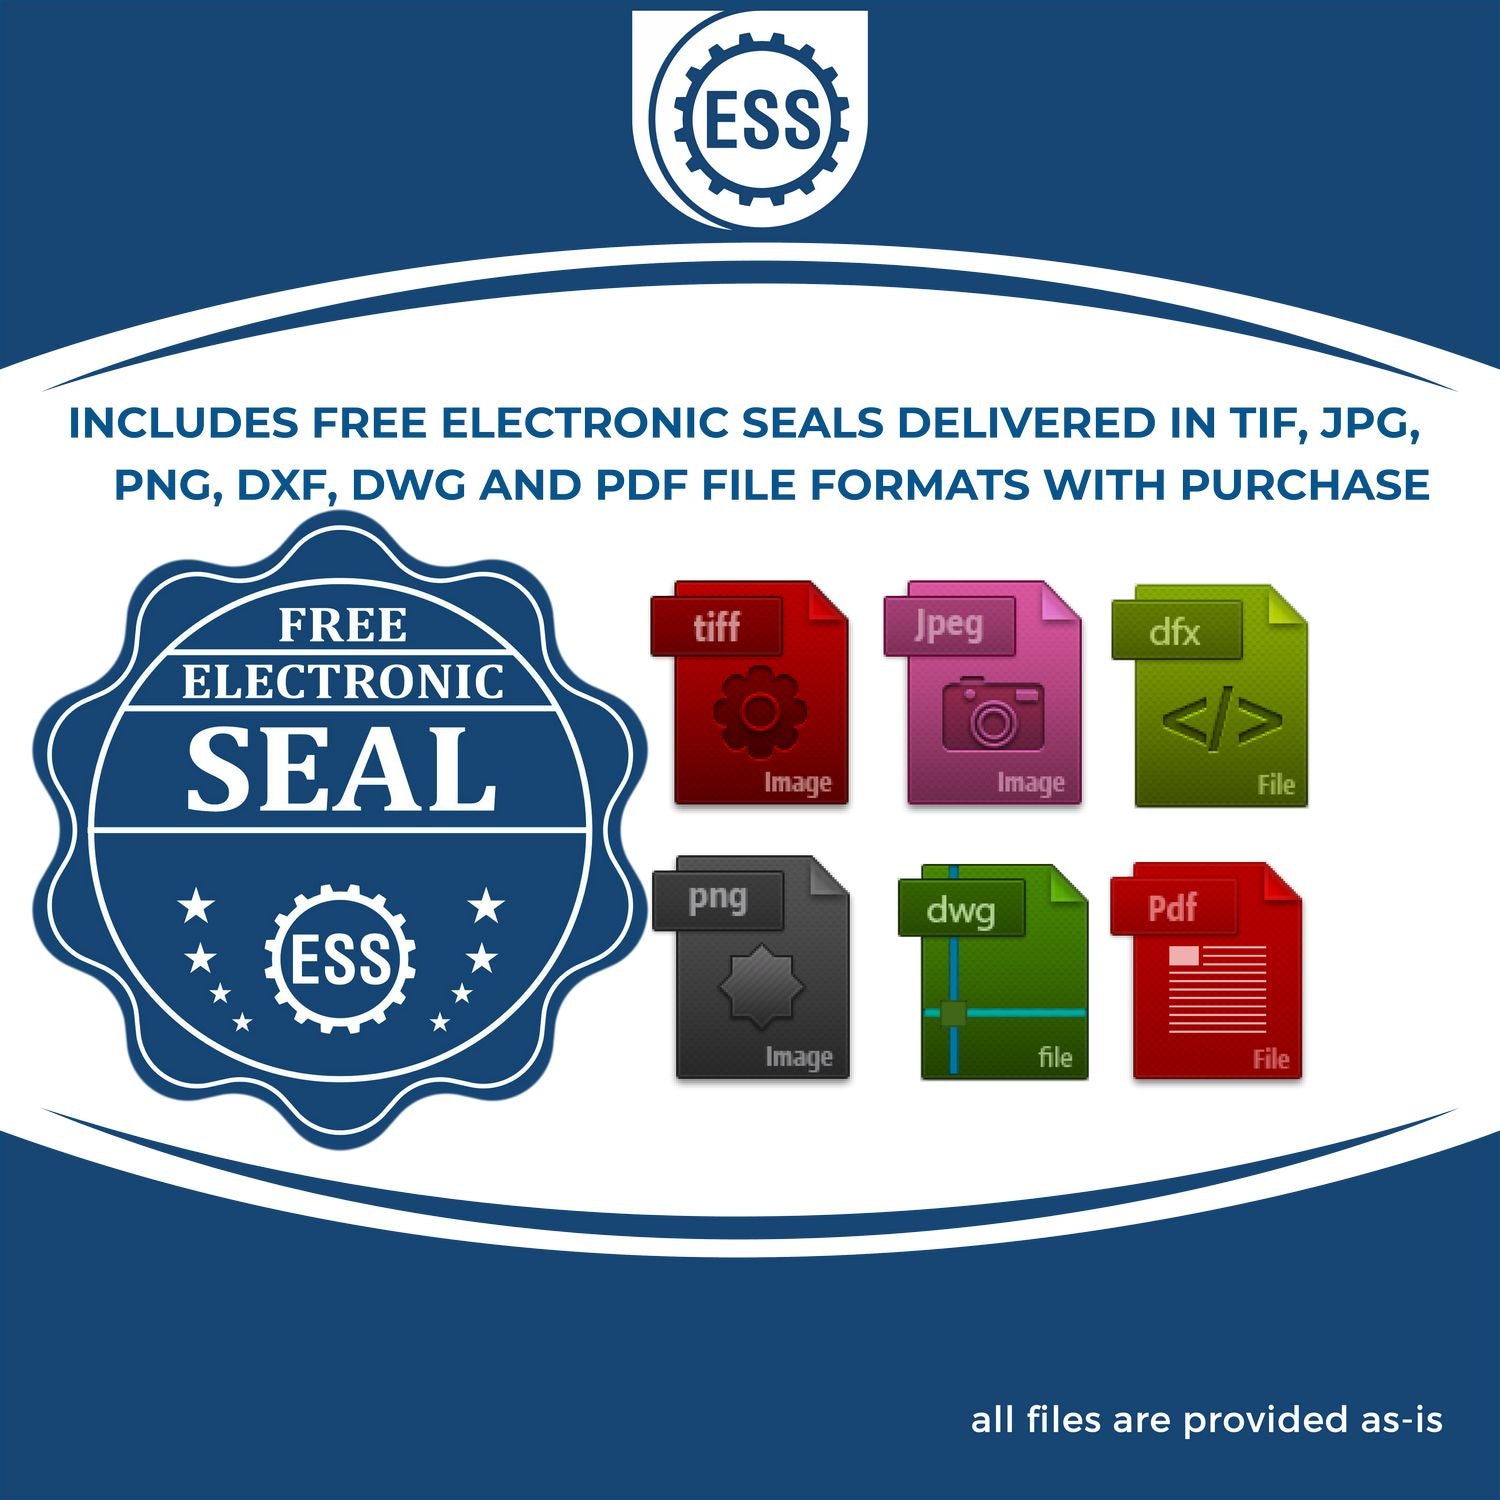 An infographic for the free electronic seal for the Premium MaxLight Pre-Inked Michigan Landscape Architectural Stamp illustrating the different file type icons such as DXF, DWG, TIF, JPG and PNG.